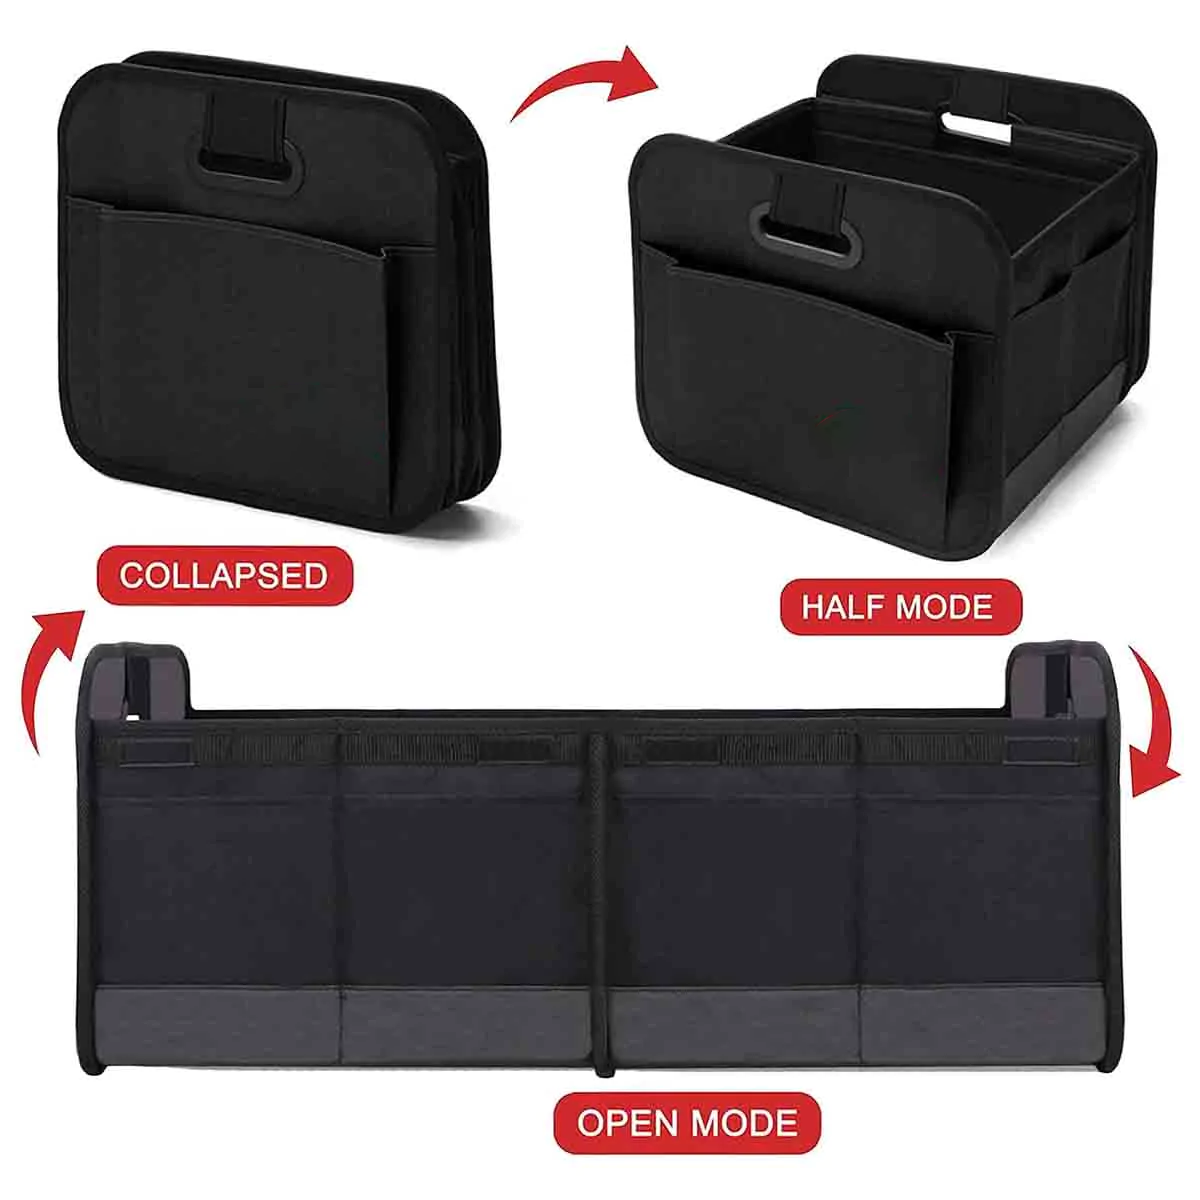 Custom Text For Car Trunk Organizer Storage, Compatible with All Cars, Reinforced Handles, Collapsible Multi, Compartment Car Organizers, Foldable and Waterproof, 600D Oxford Polyester DA12995